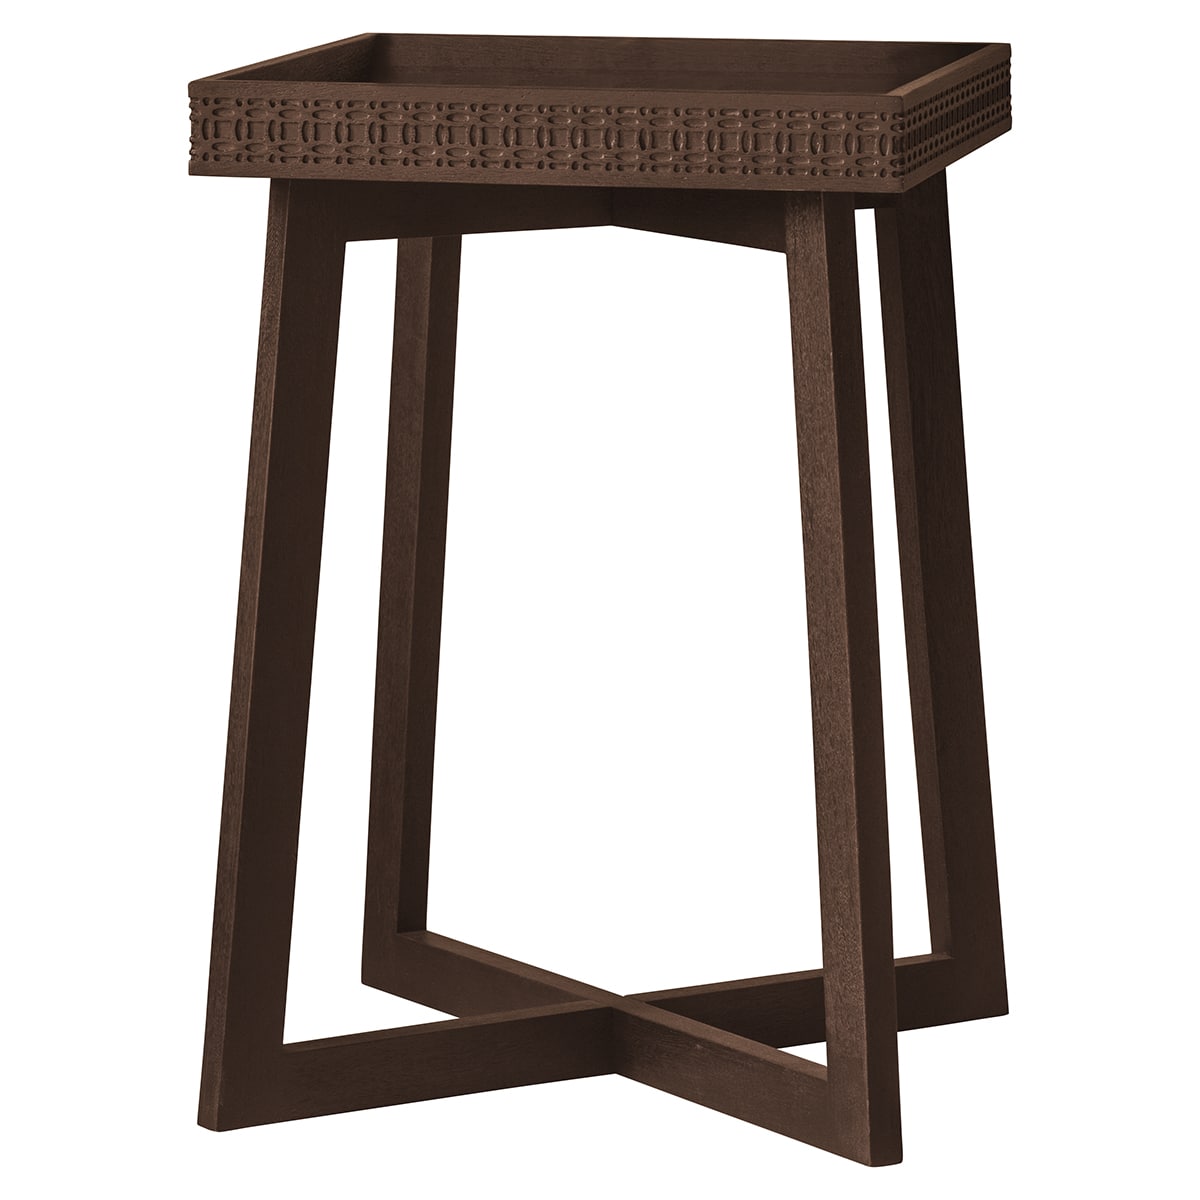 Product picture of the side table with blind fretwork on sides of the tray-like table top and cross legged base in brown